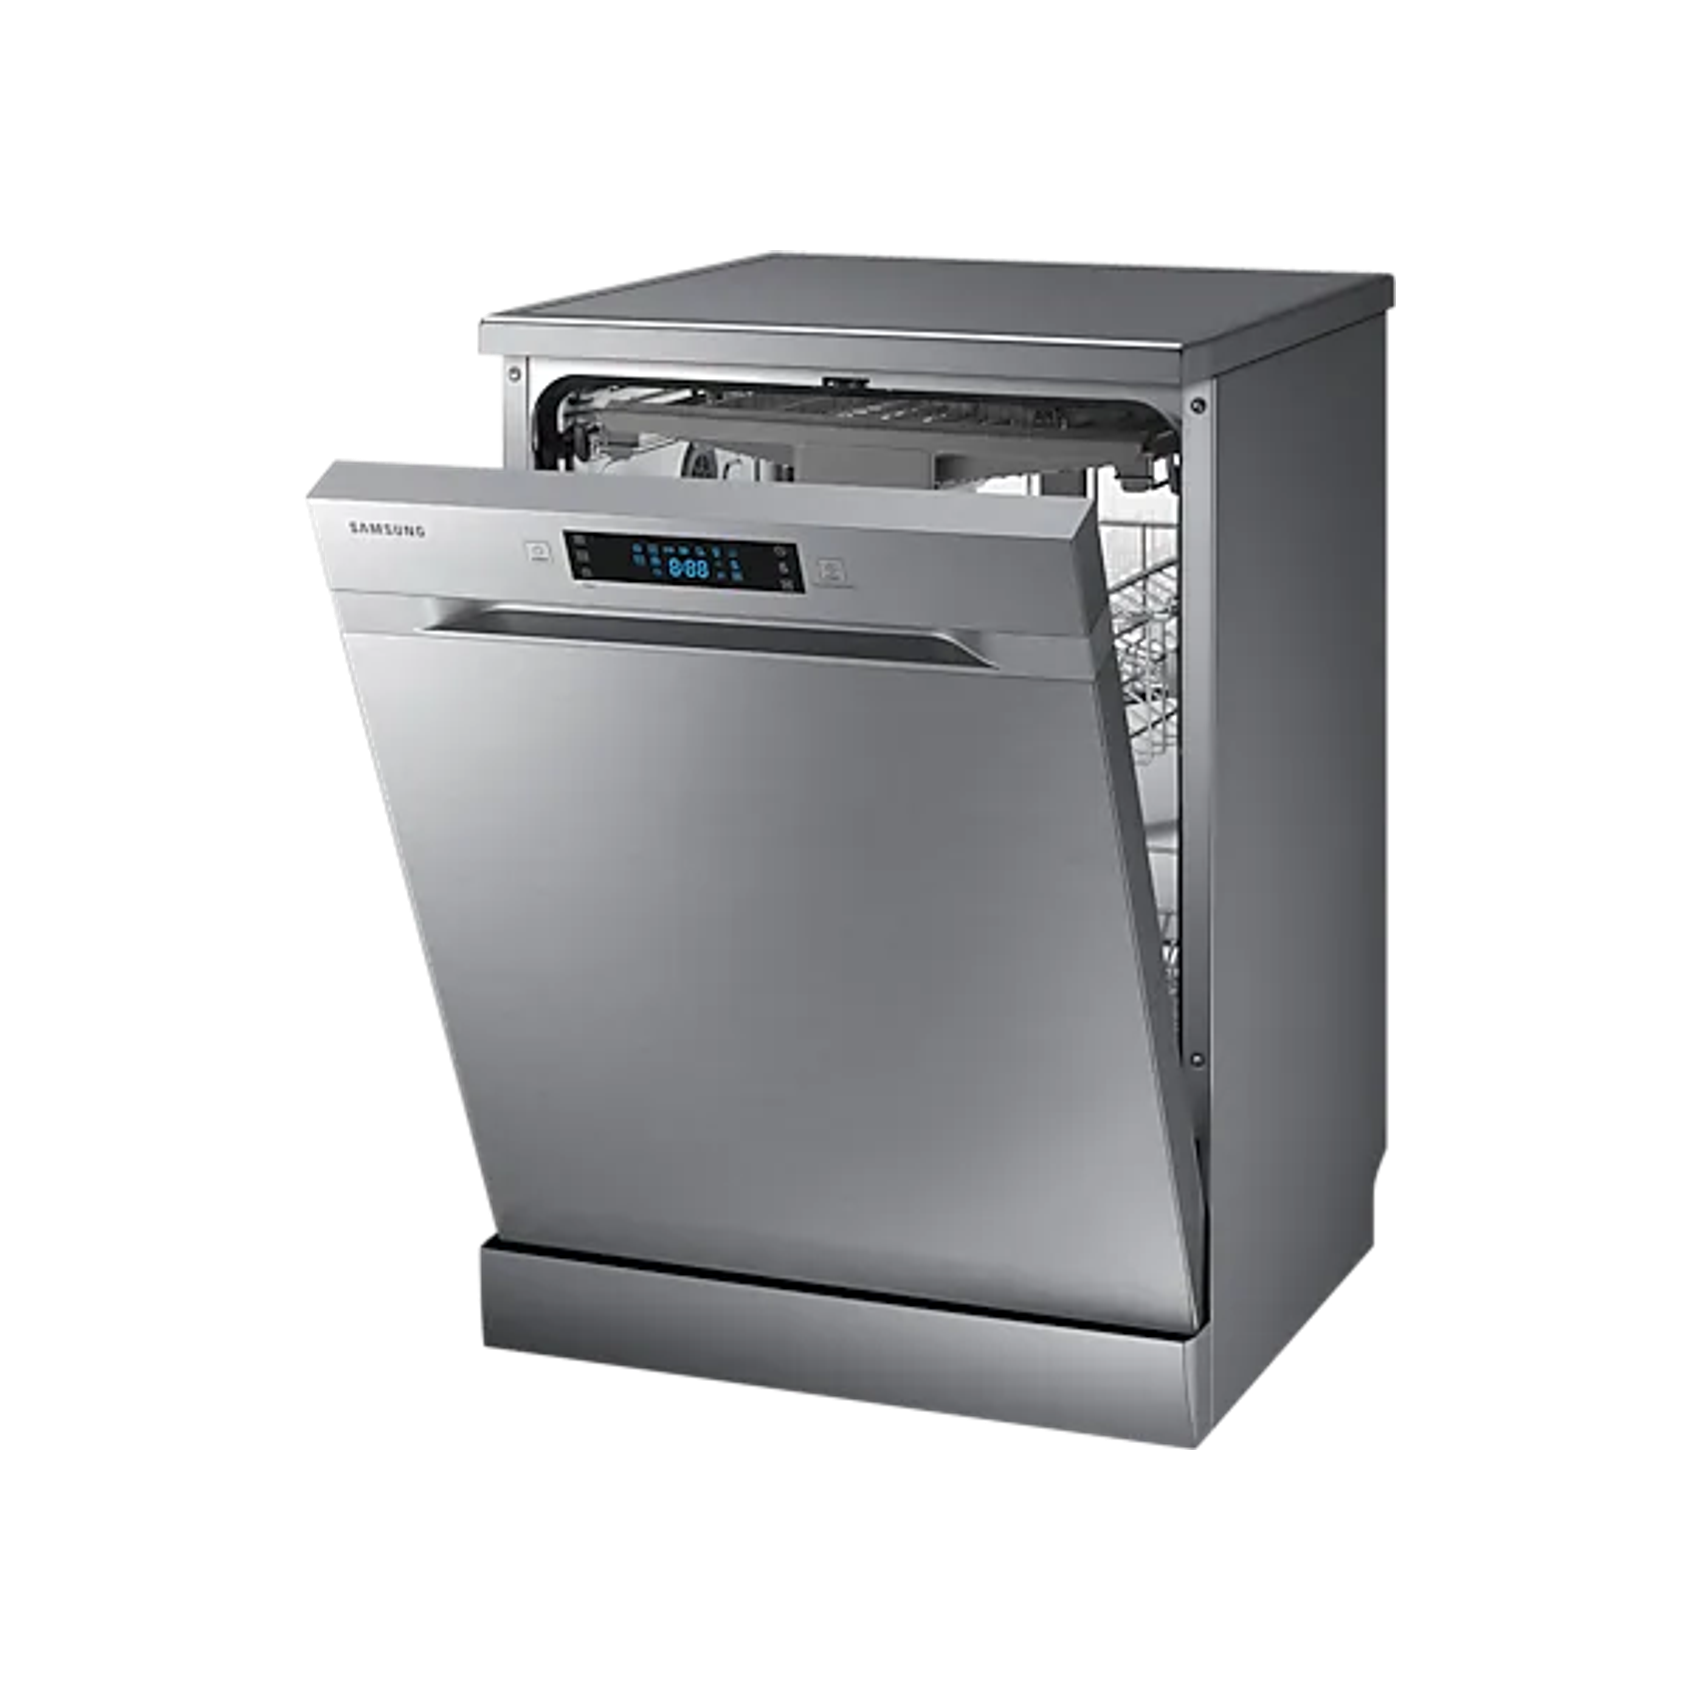 Samsung 14 Place Dishwasher with Wide Led Display - Silver (Photo: 2)